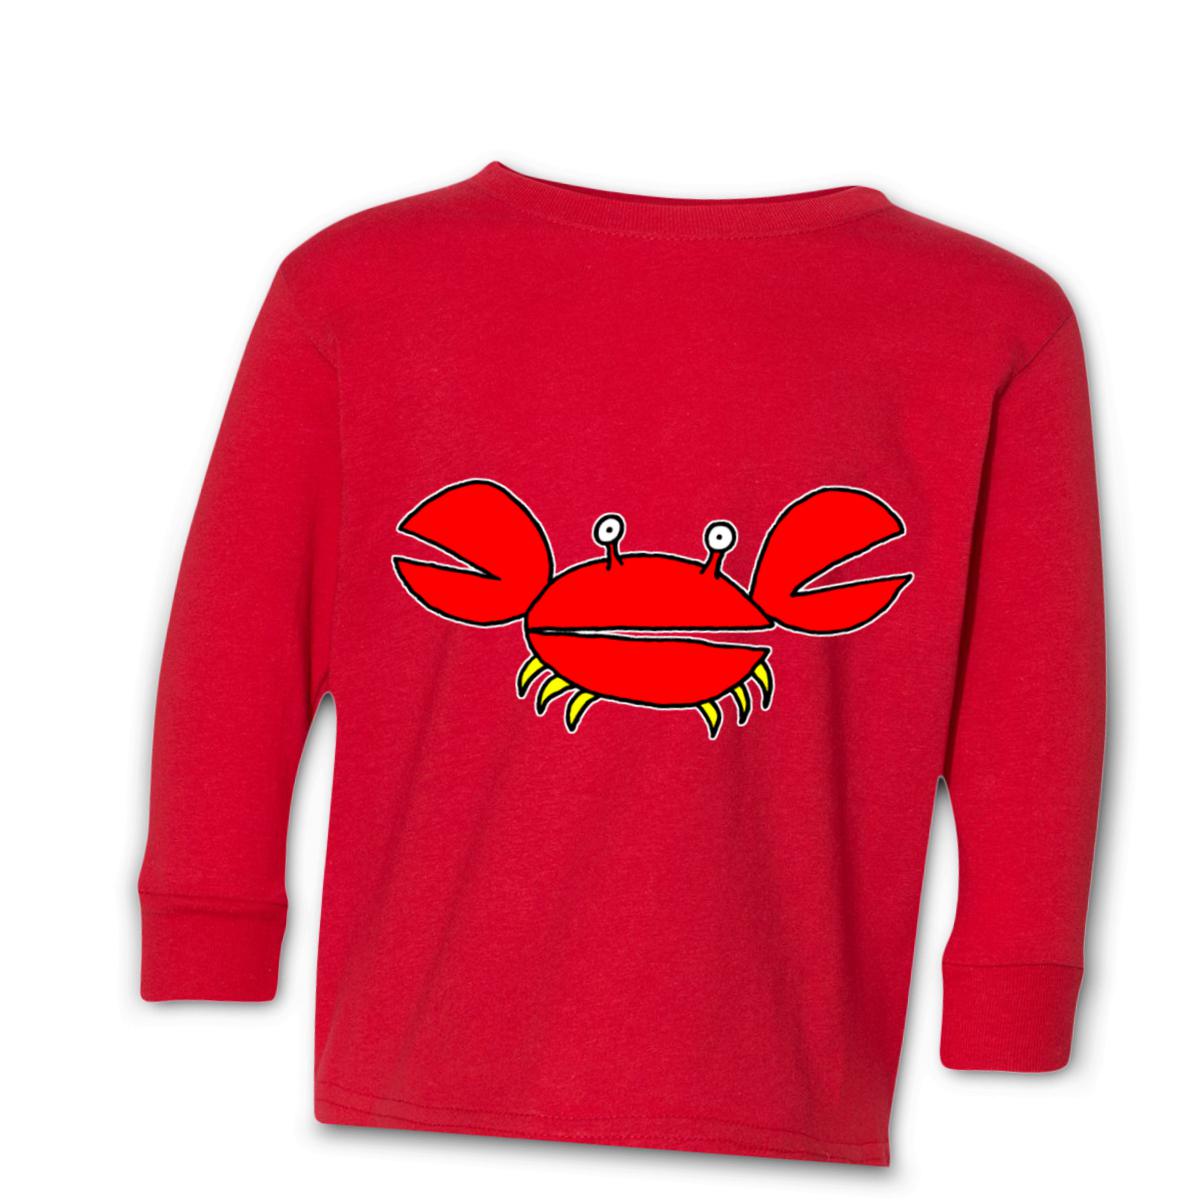 Crab Toddler Long Sleeve Tee 2T red